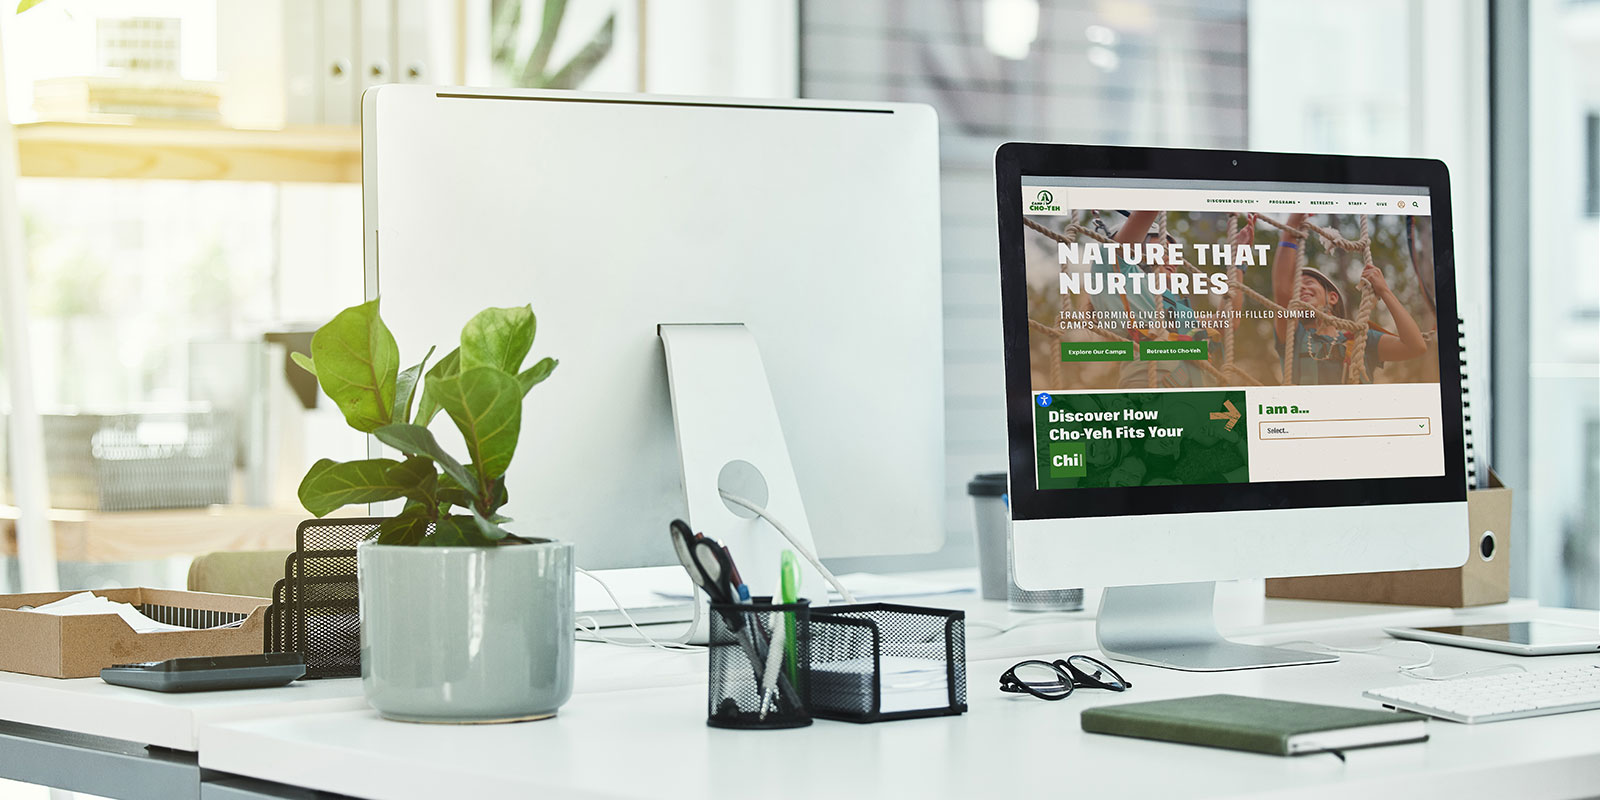 A computer screen is on a desk with a plant, showcasing the expertise of web designers in crafting visually appealing and functional websites.